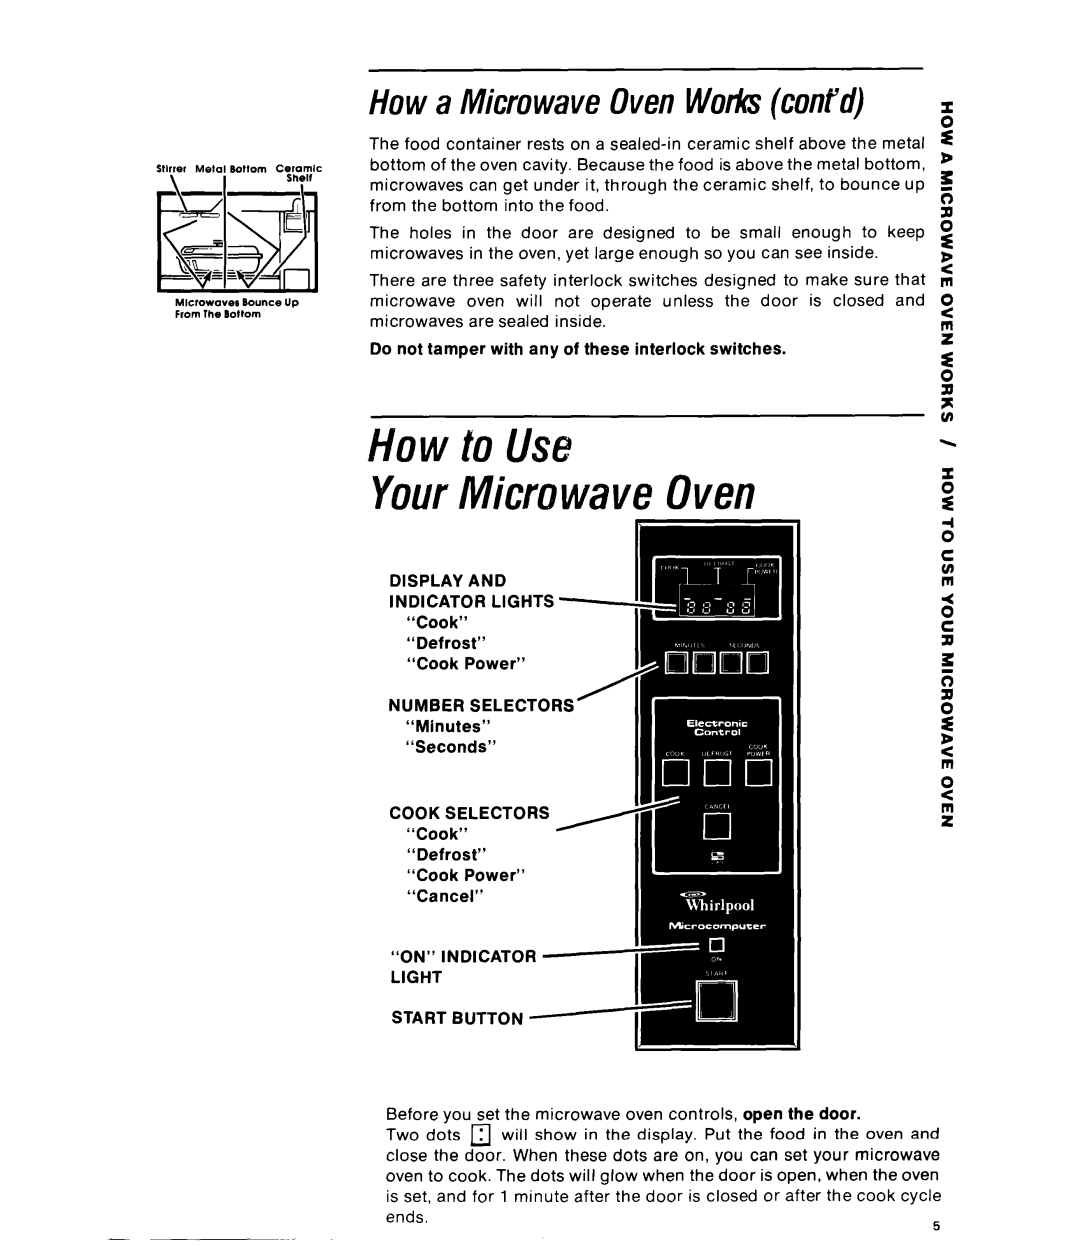 Whirlpool RJM7600 manual How to Use YourMicrowave Oven, Howa MicrowaveOvenWorksconpld 